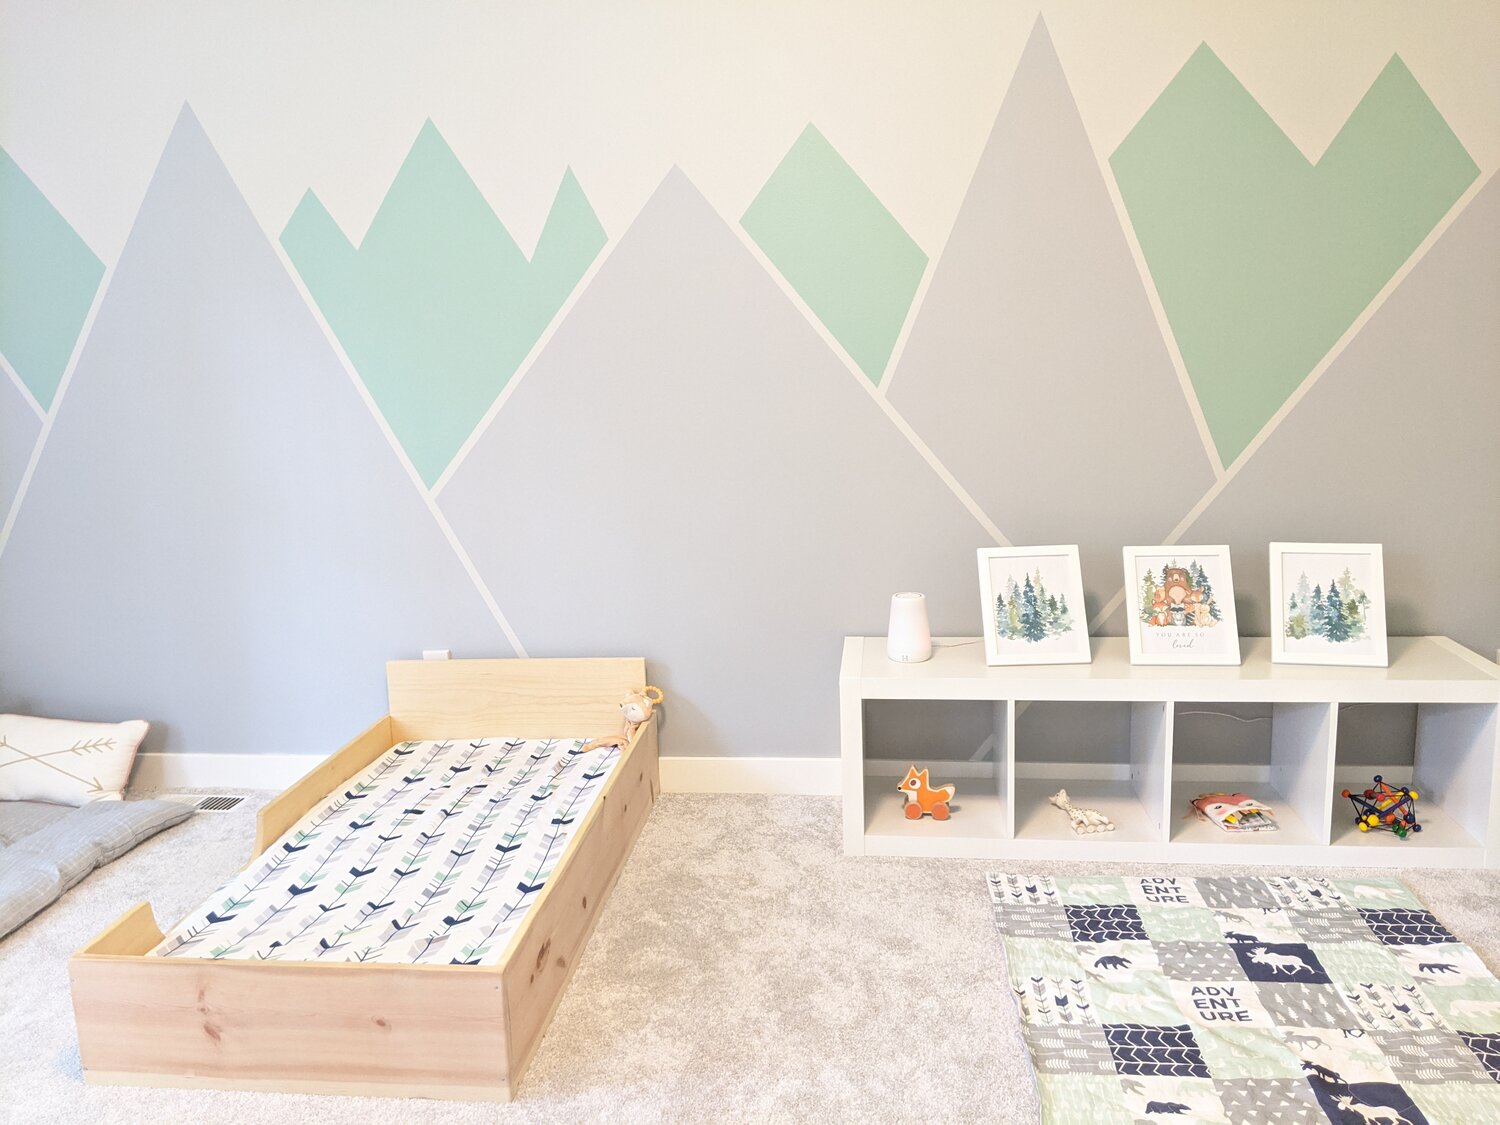 Sleep And Floor Bed Tips With, Infant Floor Bed Frame Toddler Diy